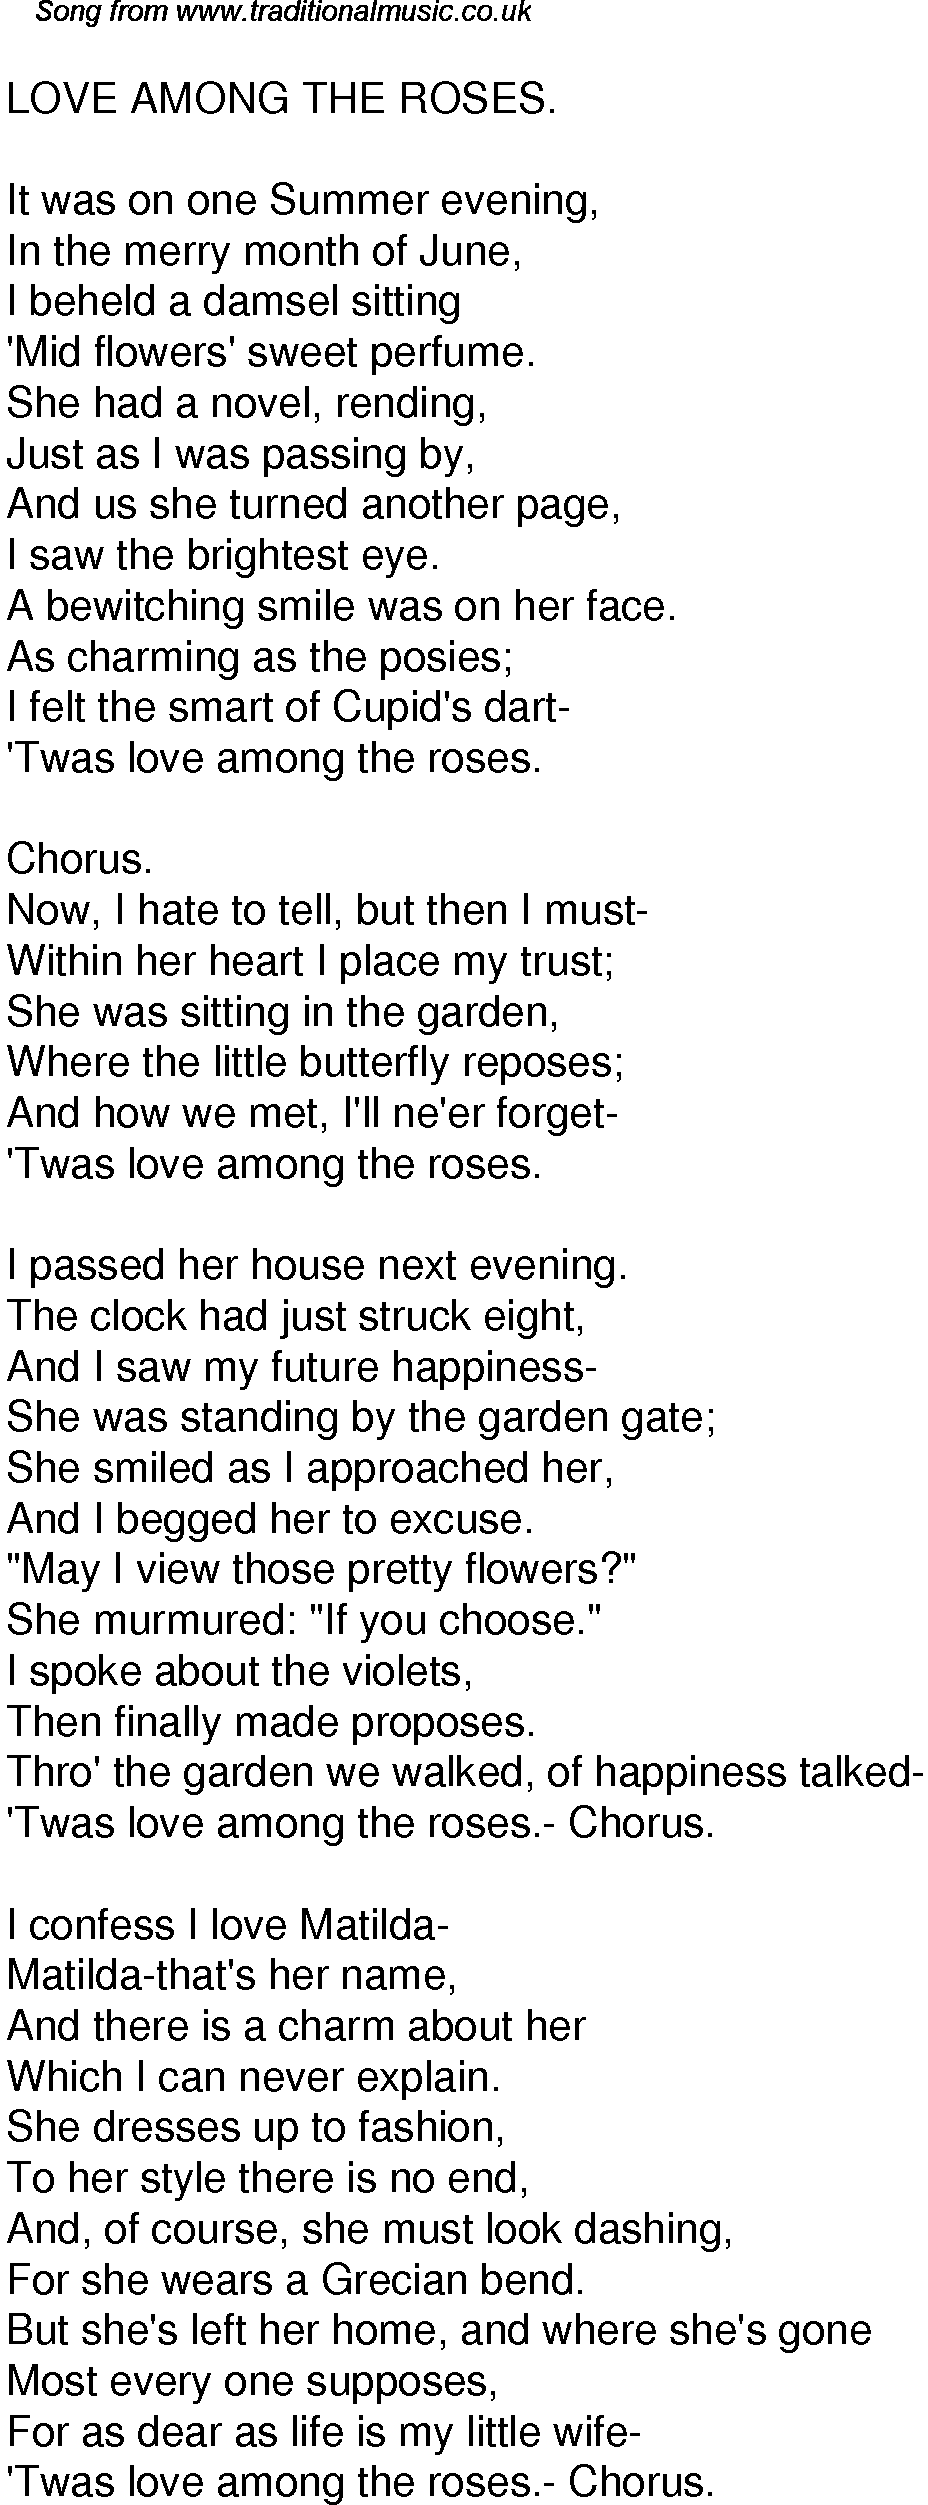 old time song lyrics for 40 love among the roses